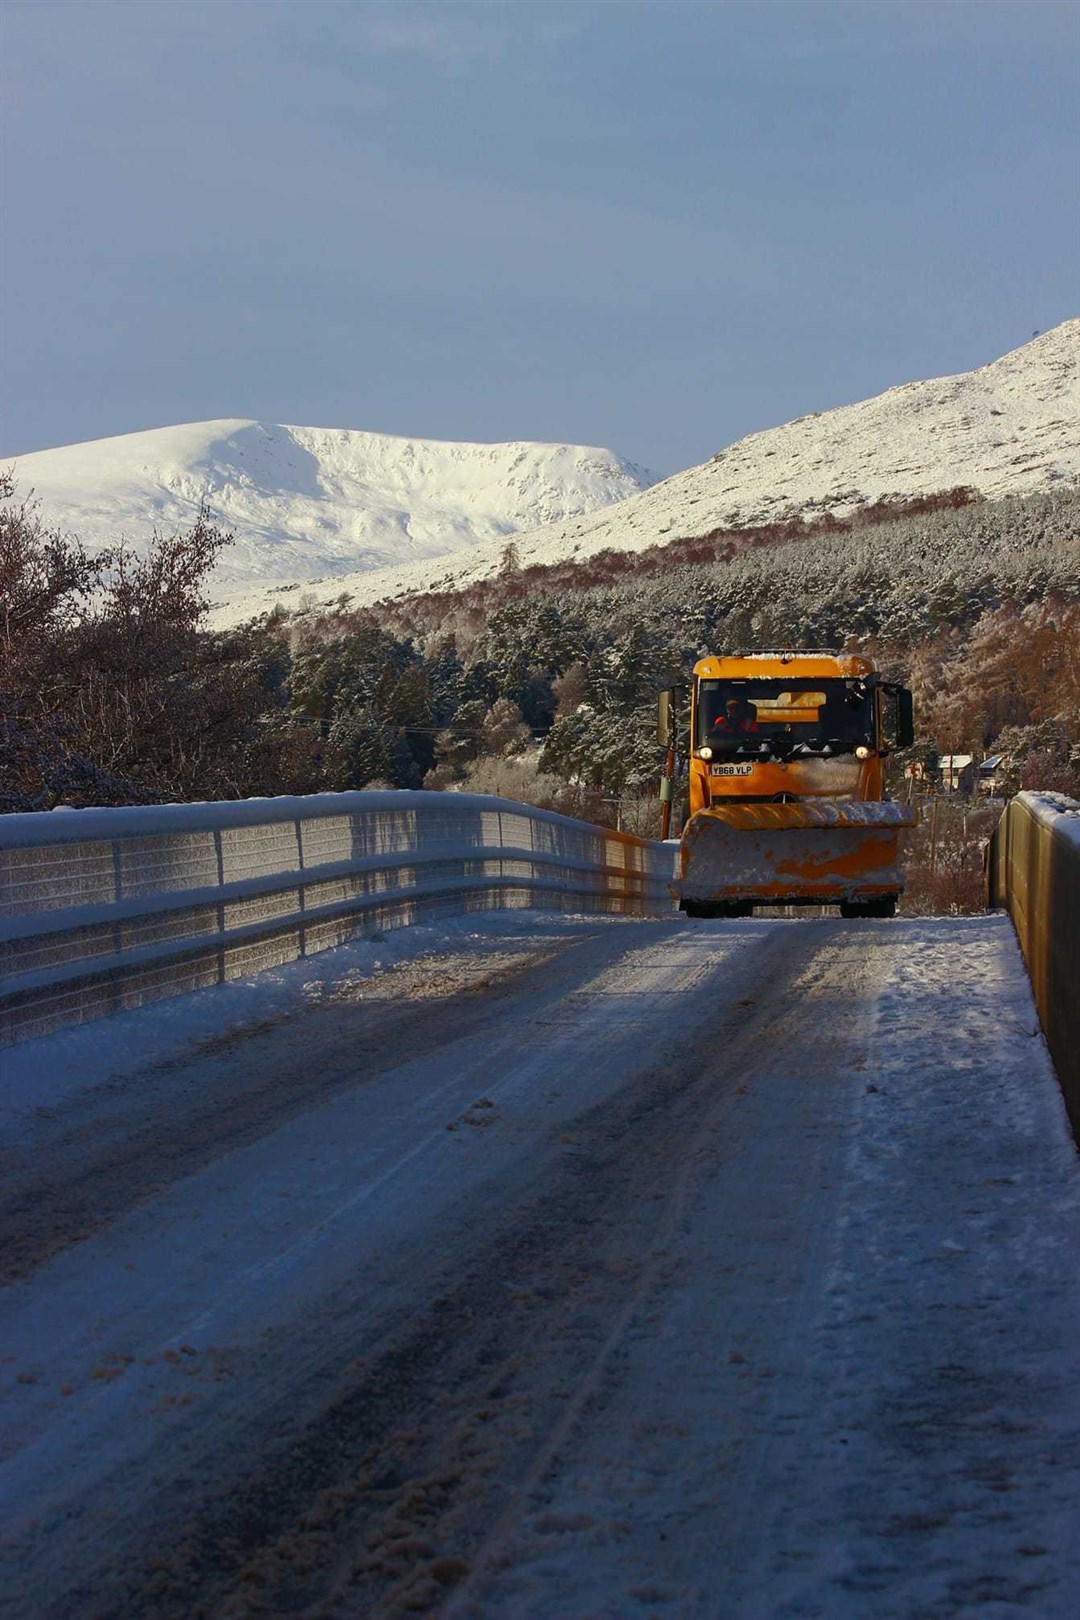 Highland Council roads teams are working to keep the highways clear in the latest winter storms